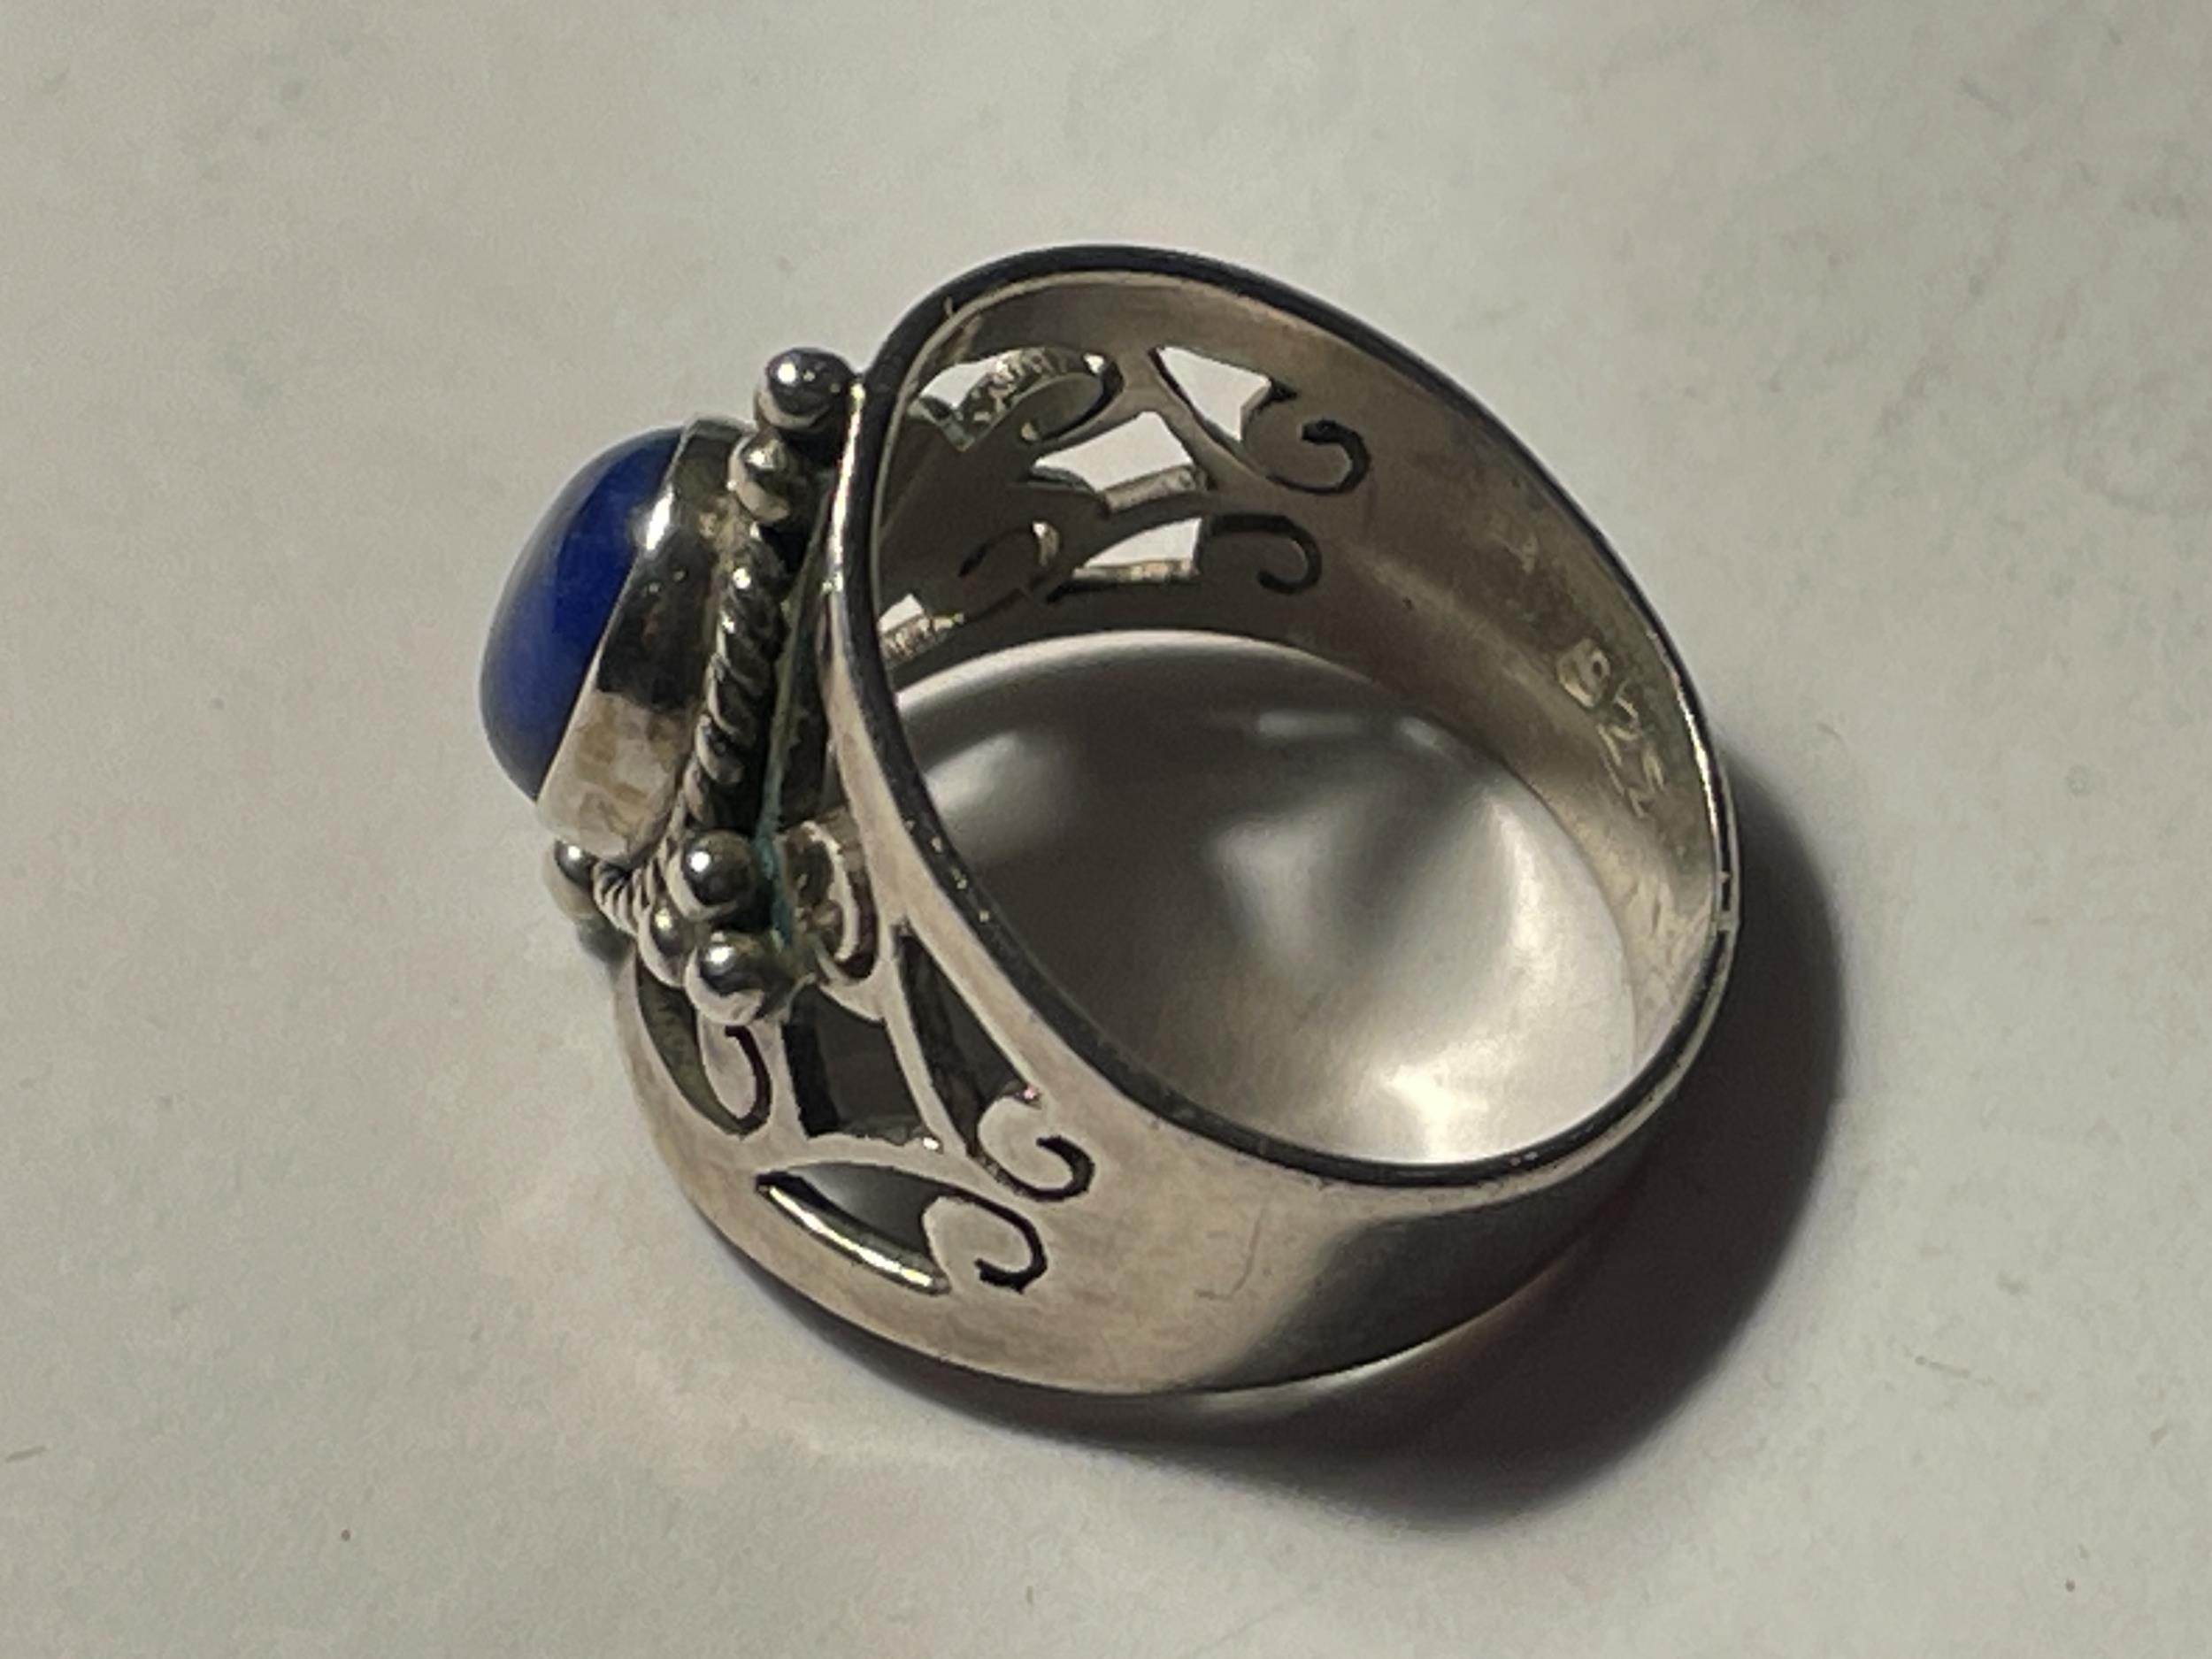 A SILVER DRESS RING WITH A BLUE CENTRE STONE IN A PRESENTATION BOX - Image 3 of 4